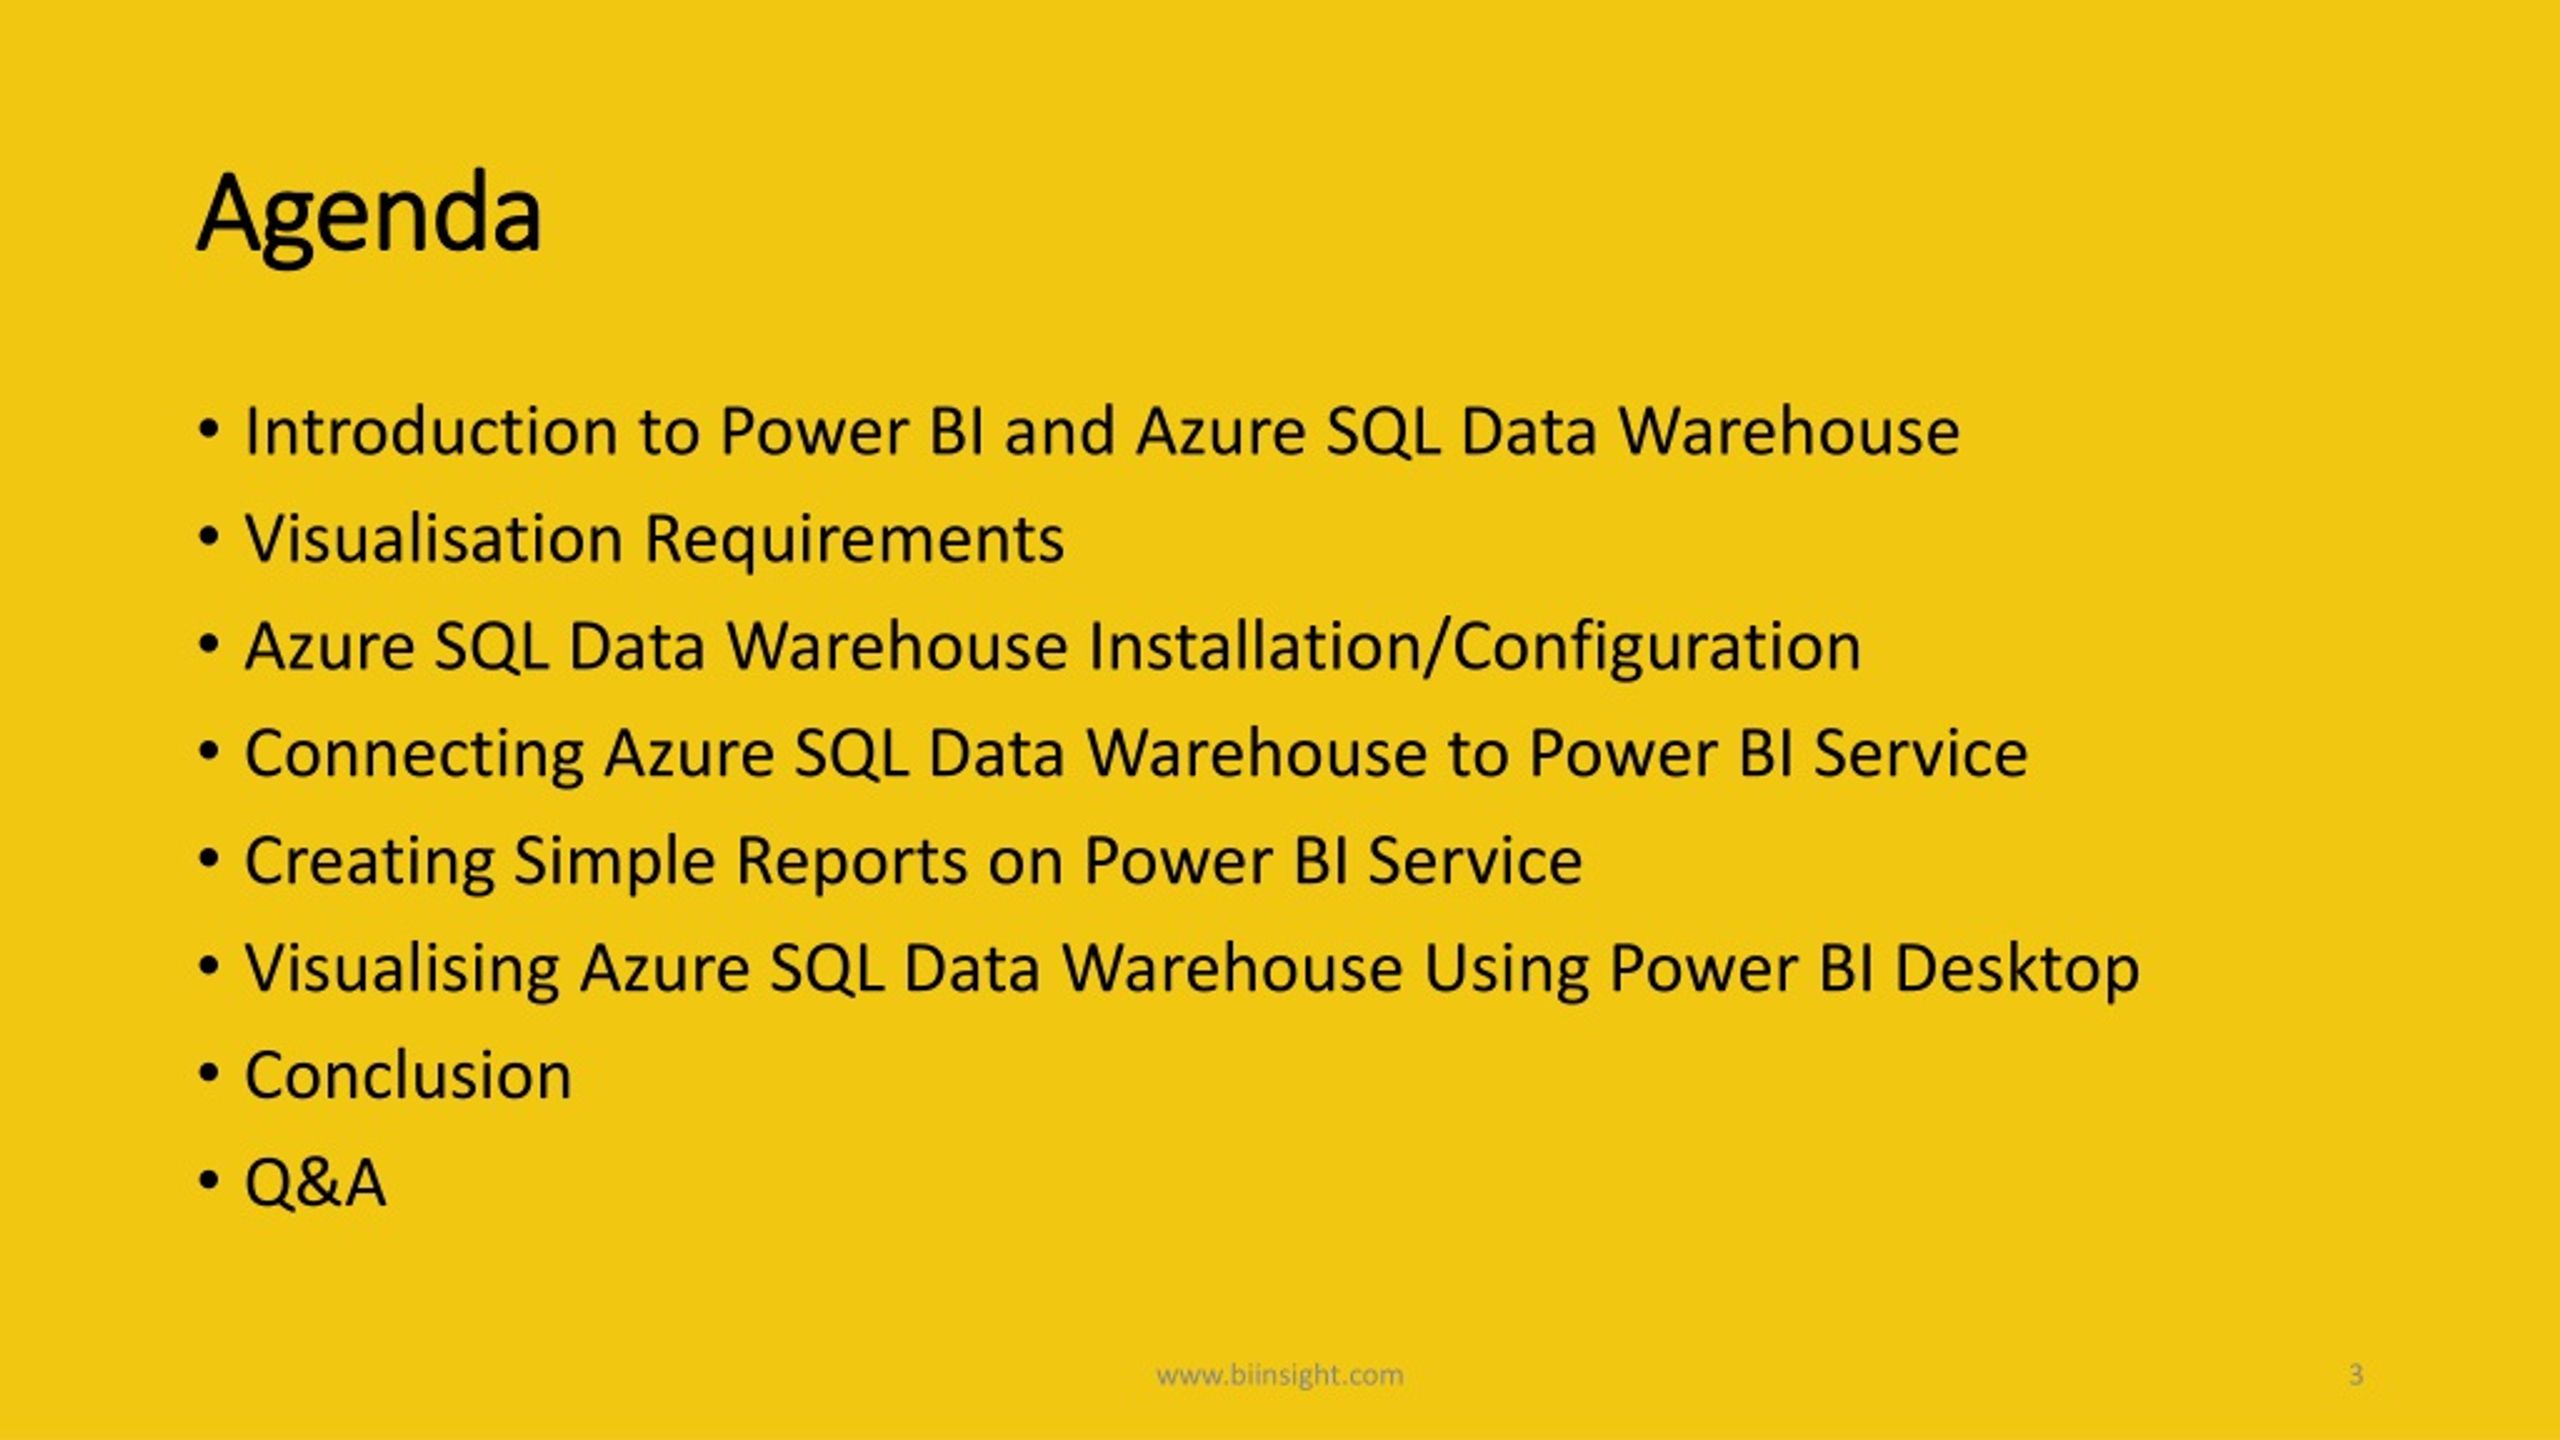 Ppt Visualising Your Azure Sql Data Warehouse With Power Bi Powerpoint Presentation Id9019146 7431